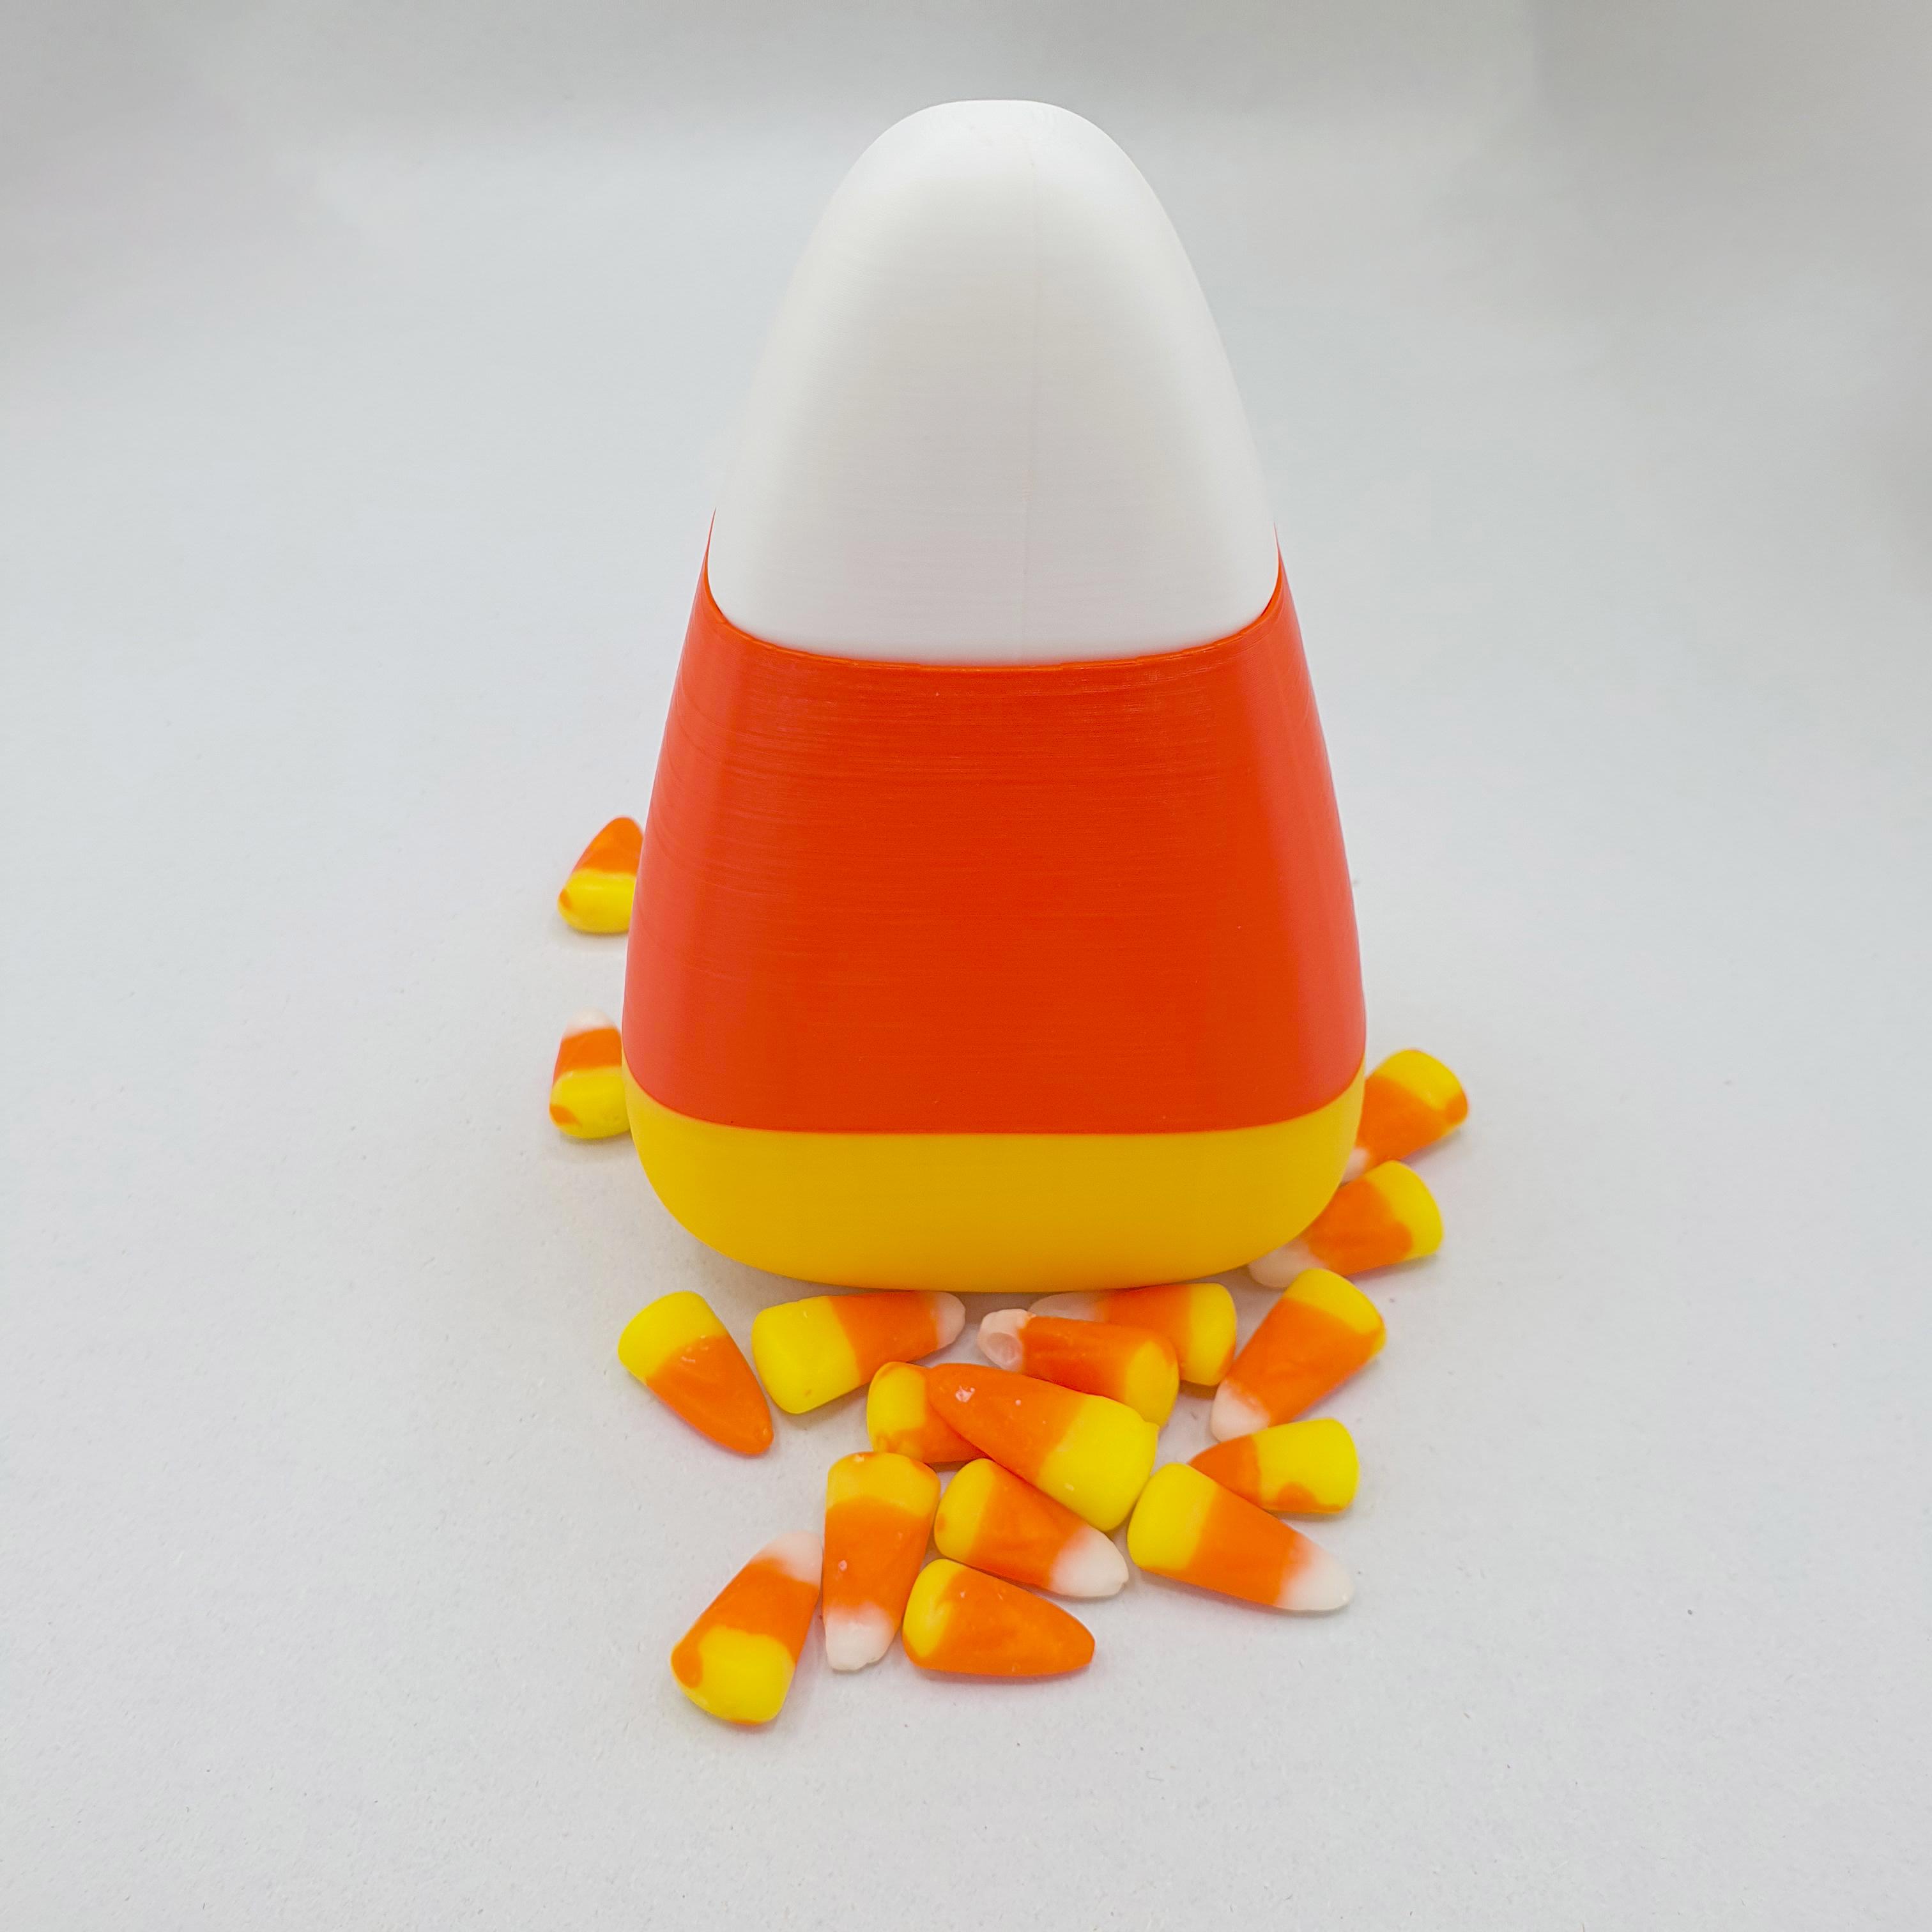 CANDY CORN CONTAINER PRINT IN PLACE NO SUPPORTS CANDY CORN STASH 3d model